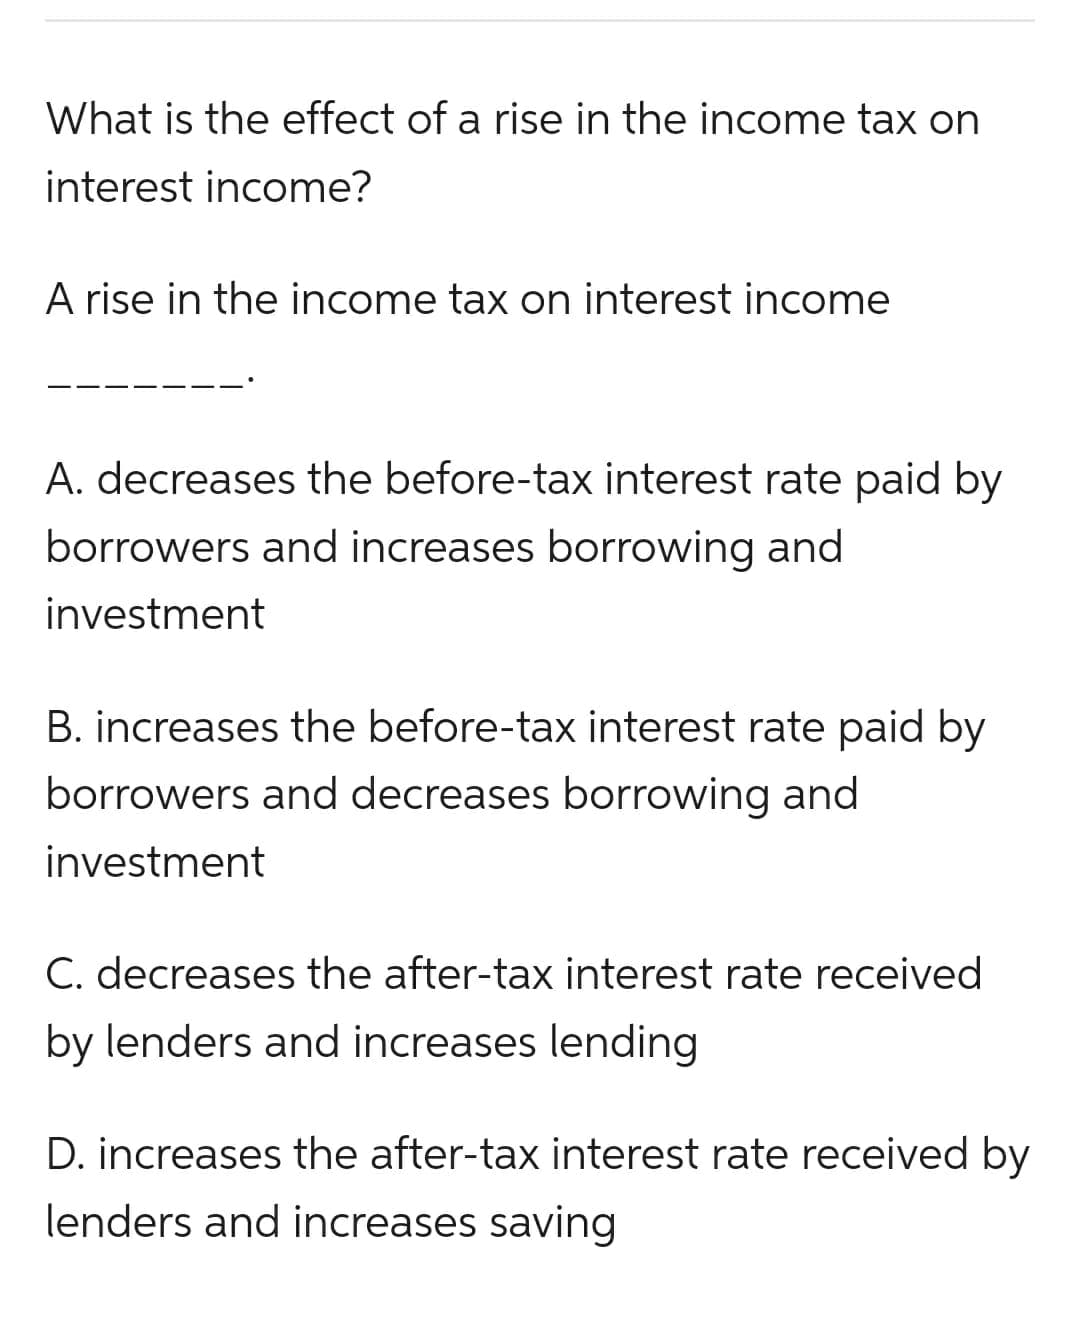 What is the effect of a rise in the income tax on
interest income?
A rise in the income tax on interest income
A. decreases the before-tax interest rate paid by
borrowers and increases borrowing and
investment
B. increases the before-tax interest rate paid by
borrowers and decreases borrowing and
investment
C. decreases the after-tax interest rate received
by lenders and increases lending
D. increases the after-tax interest rate received by
lenders and increases saving